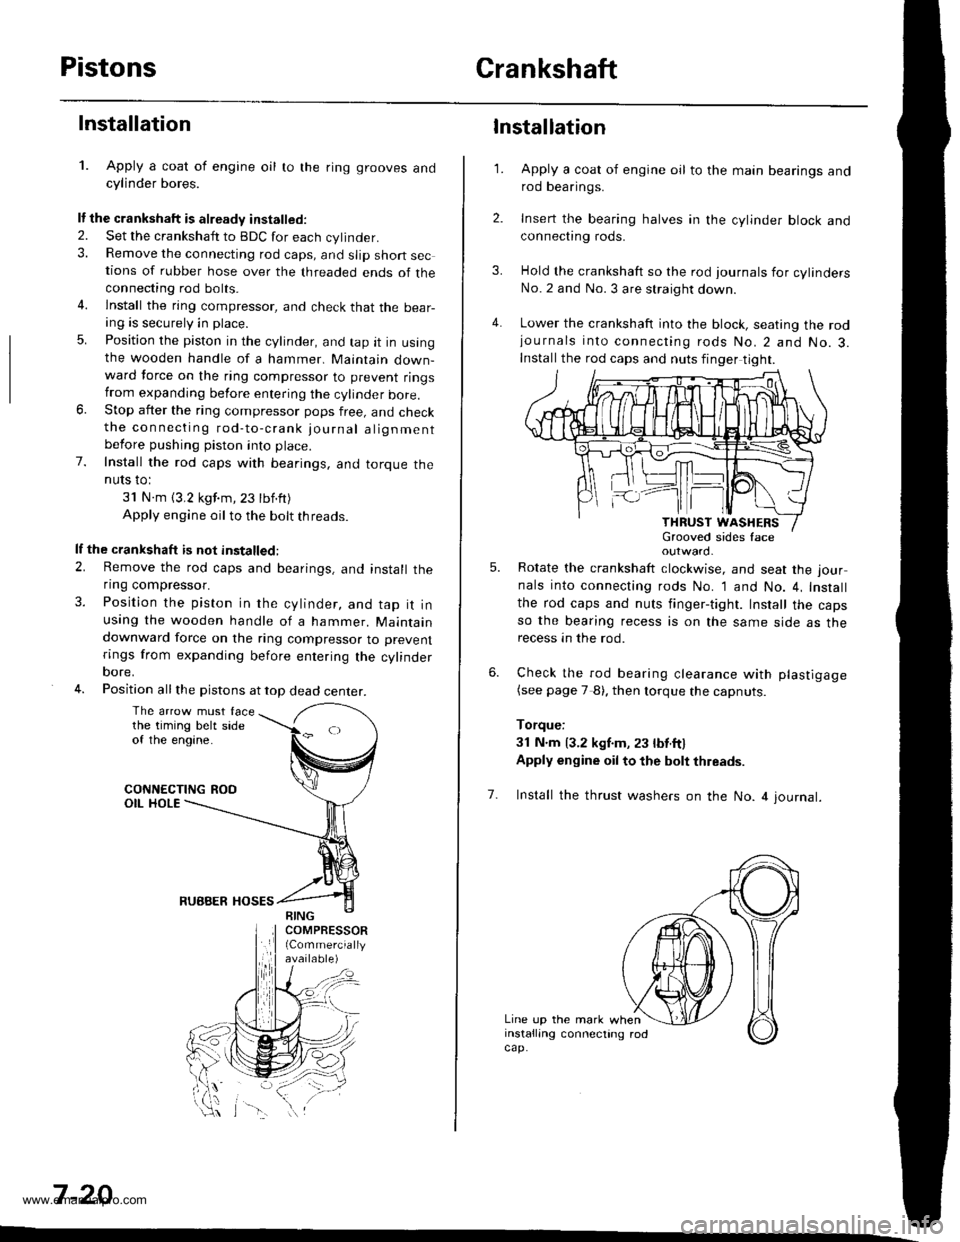 HONDA CR-V 1997 RD1-RD3 / 1.G Owners Manual 
PistonsCrankshaft
Installation
1. Apply a coat of engine oil to the ring grooves andcylinder bores.
It the crankshaft is already installed.
2. Set the crankshatt to BDC for each cylinder.3. Remove th